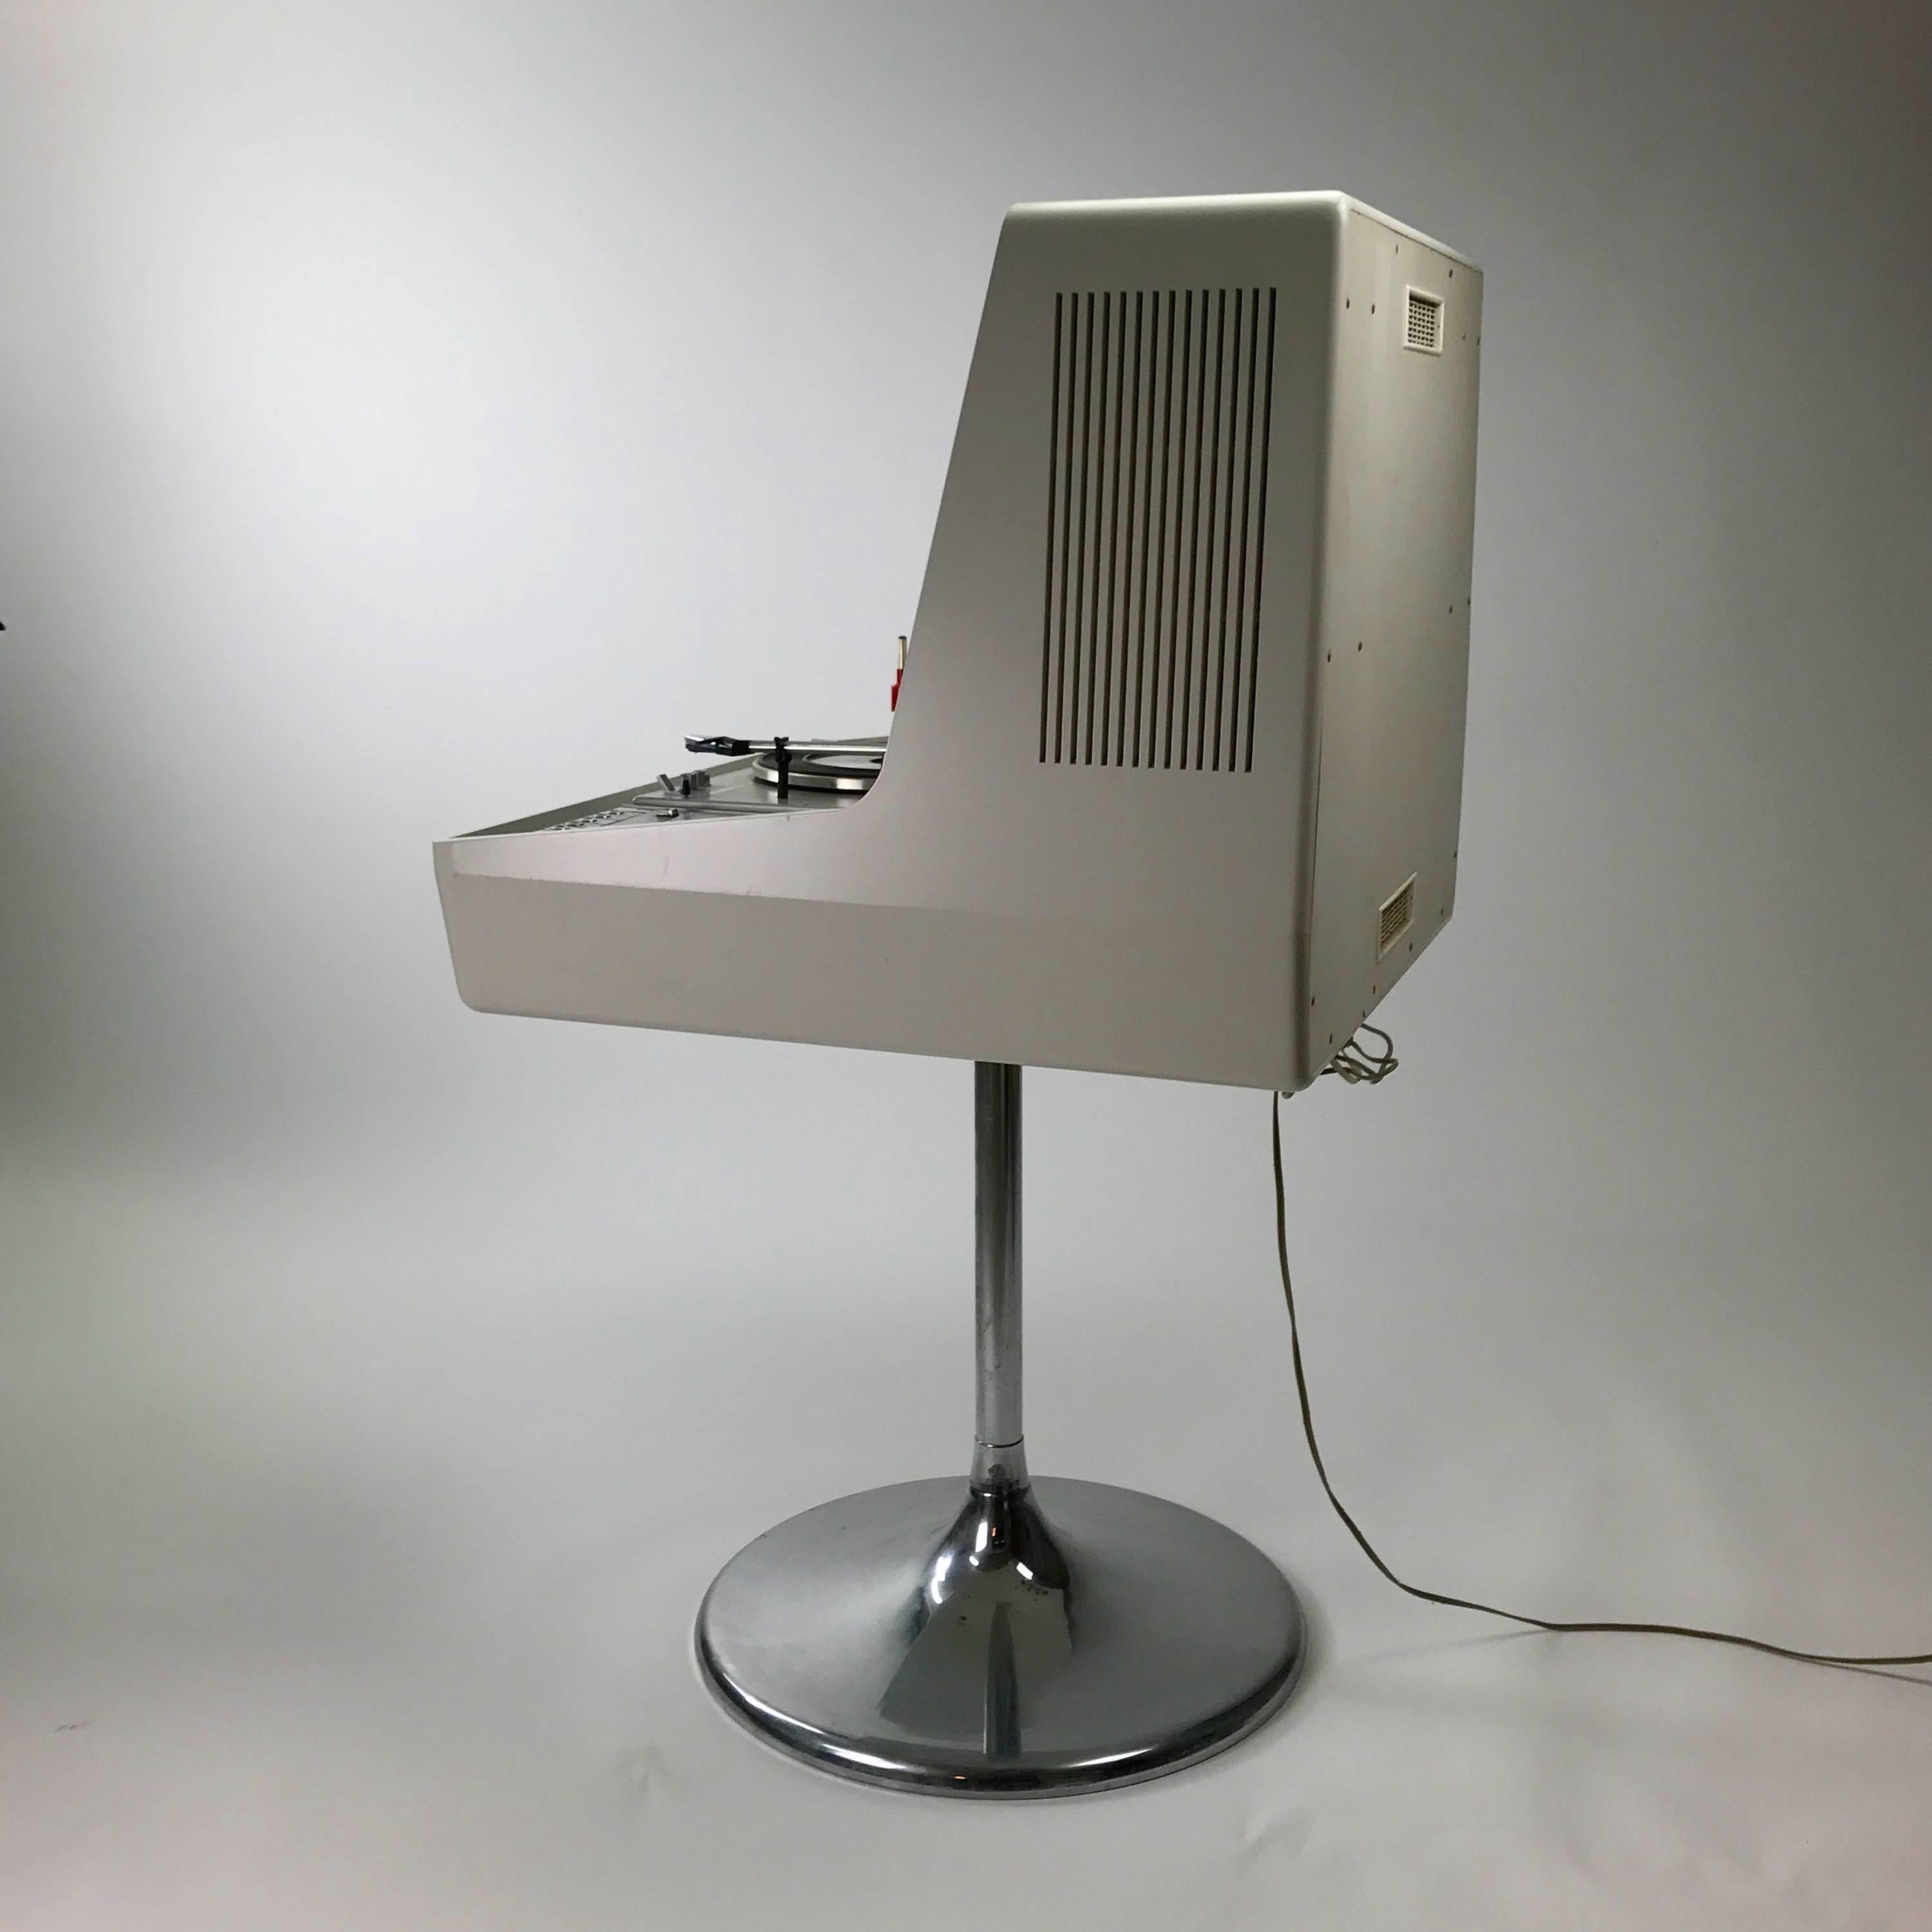 Rare and iconic collectible piece of 1970s hifh fidelity sound system by Rosita Tonmöbel. 

Beautiful chrome tulip base leads right up to the all-in-one music center which consists of cassette deck, and turn table by Philips as well as the launch